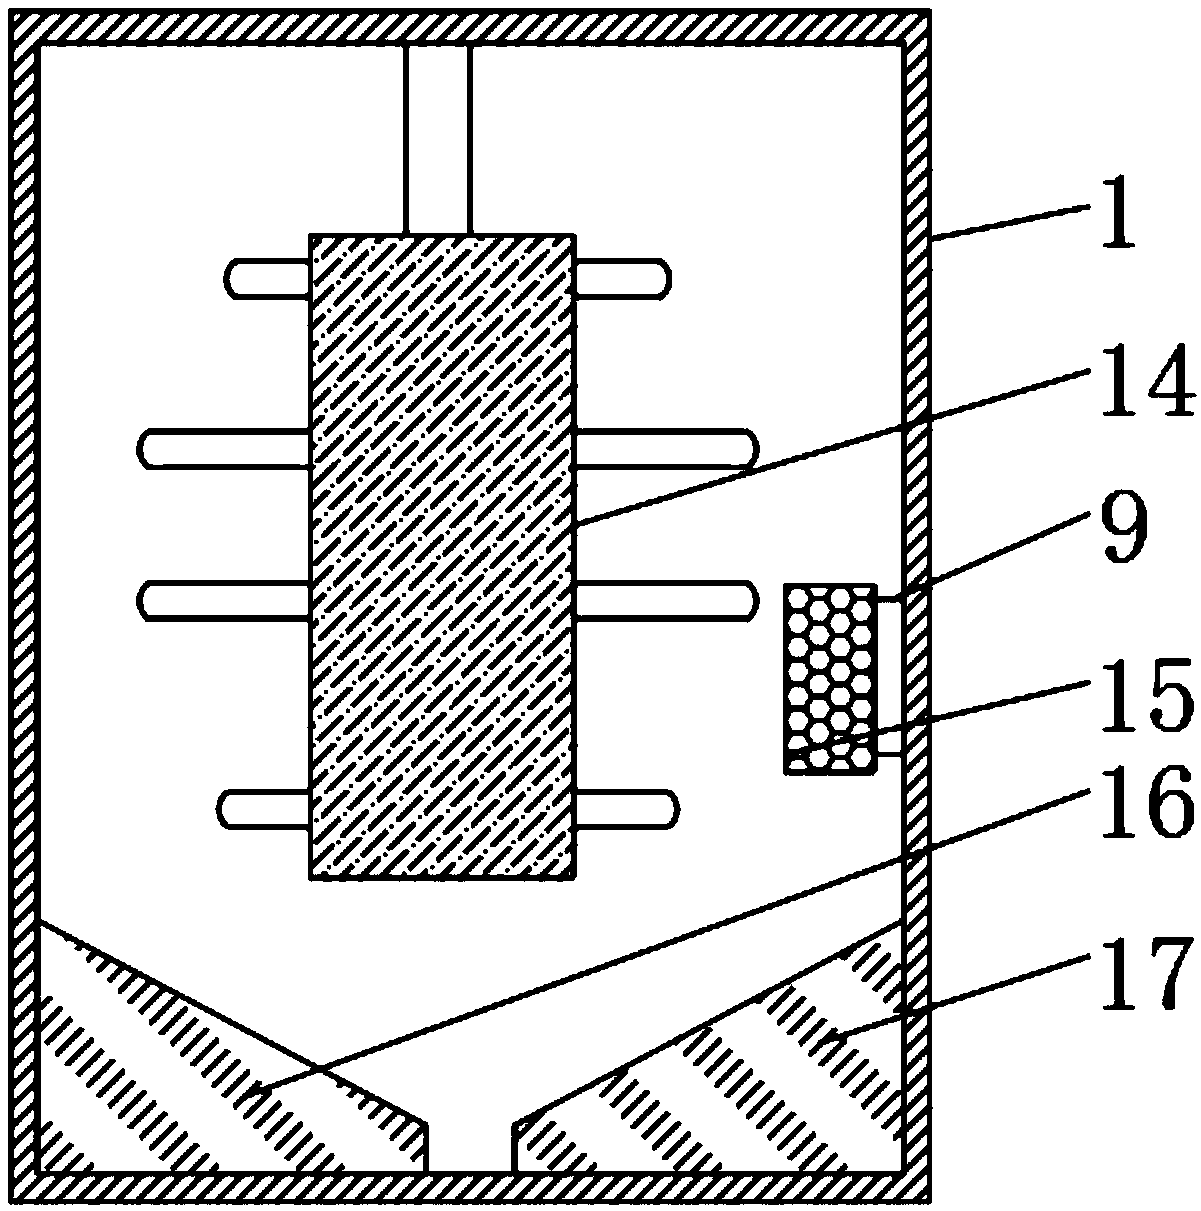 Chemical sewage filtering device